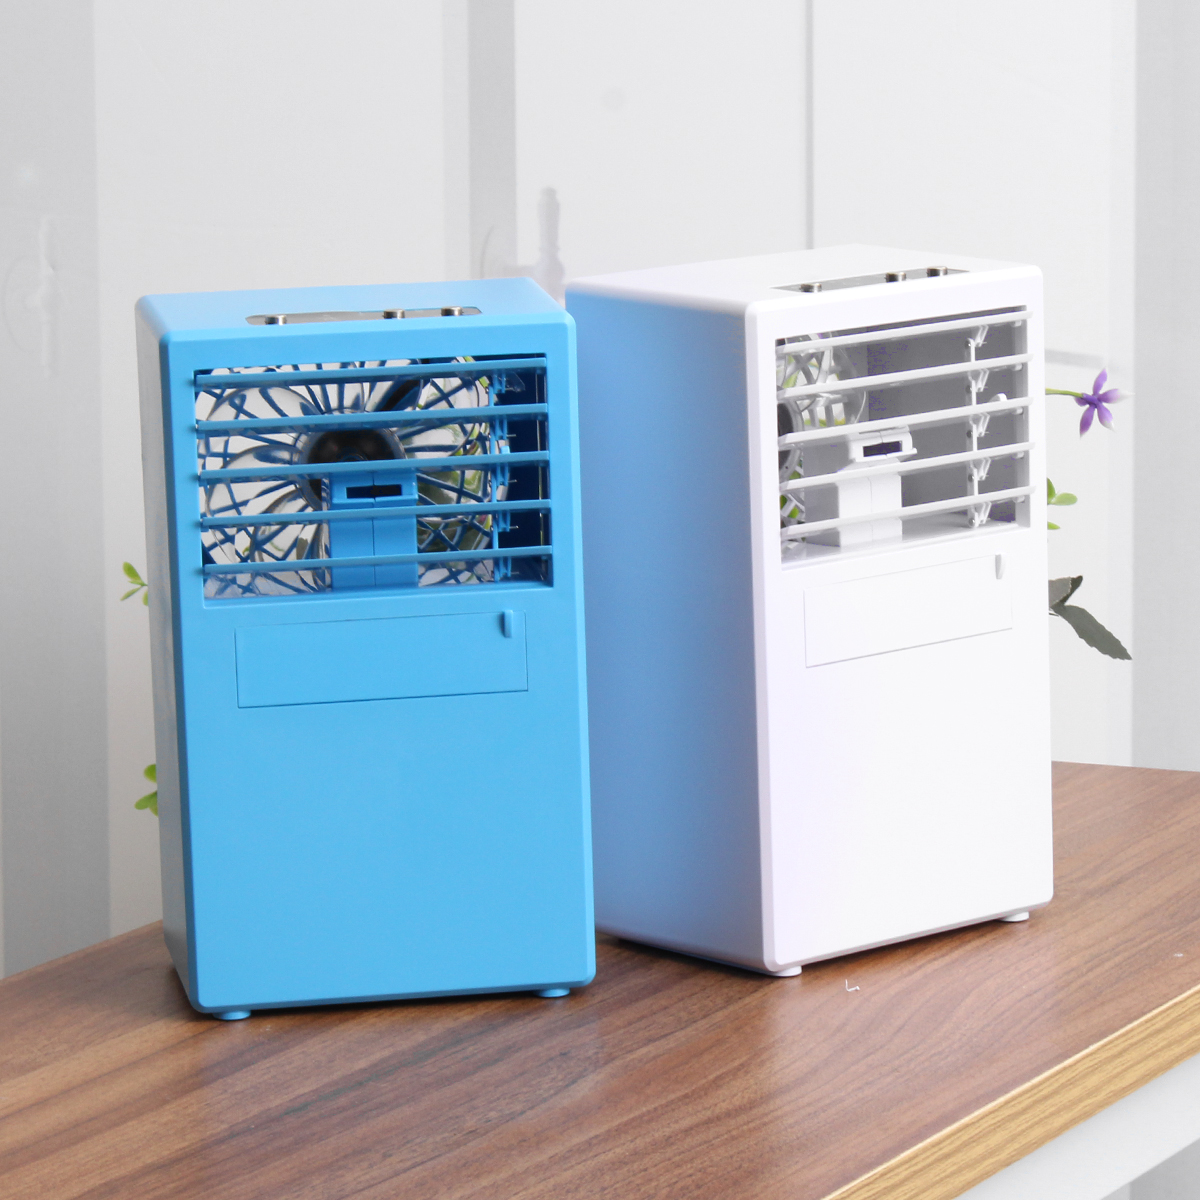 24W-24V-Portable-Air-Conditioning-Fan-Low-Noise-3-Wind-Speeds-Cooler-Digitals-Cooling-System-Timing--1710103-7